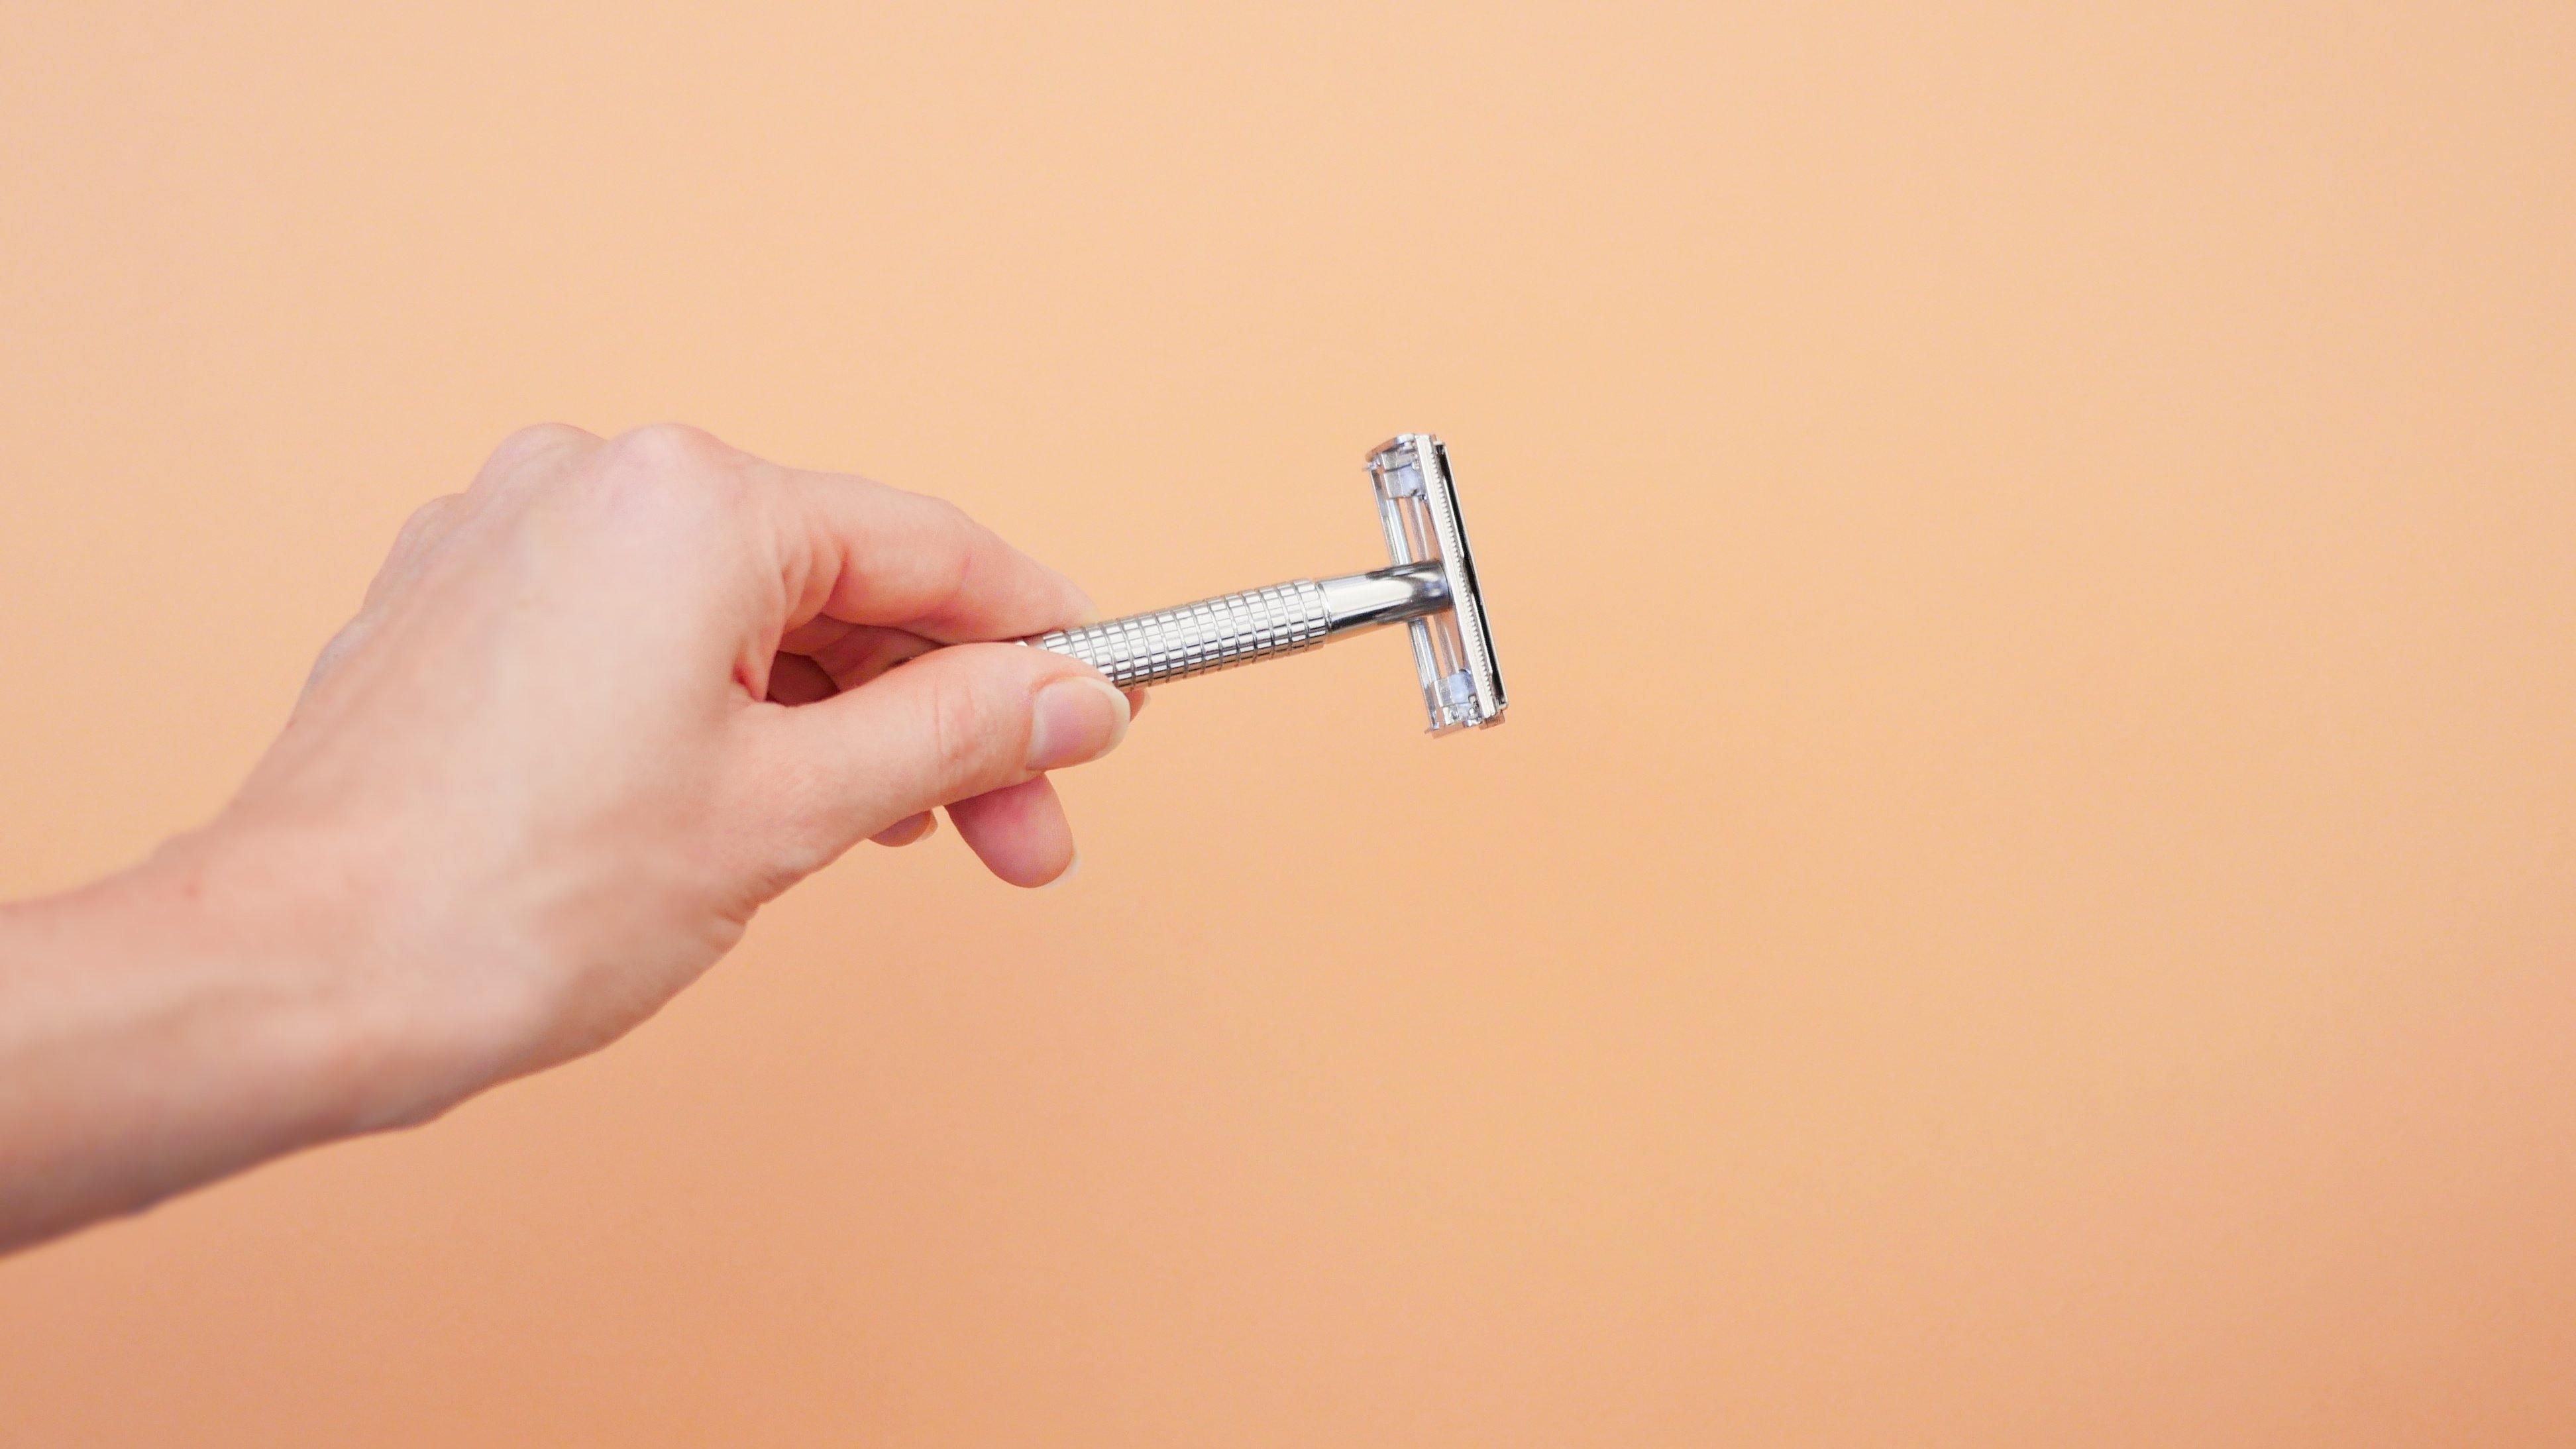 SHAVING (EVERYTHING) WITH A SAFETY RAZOR - The Good Fill